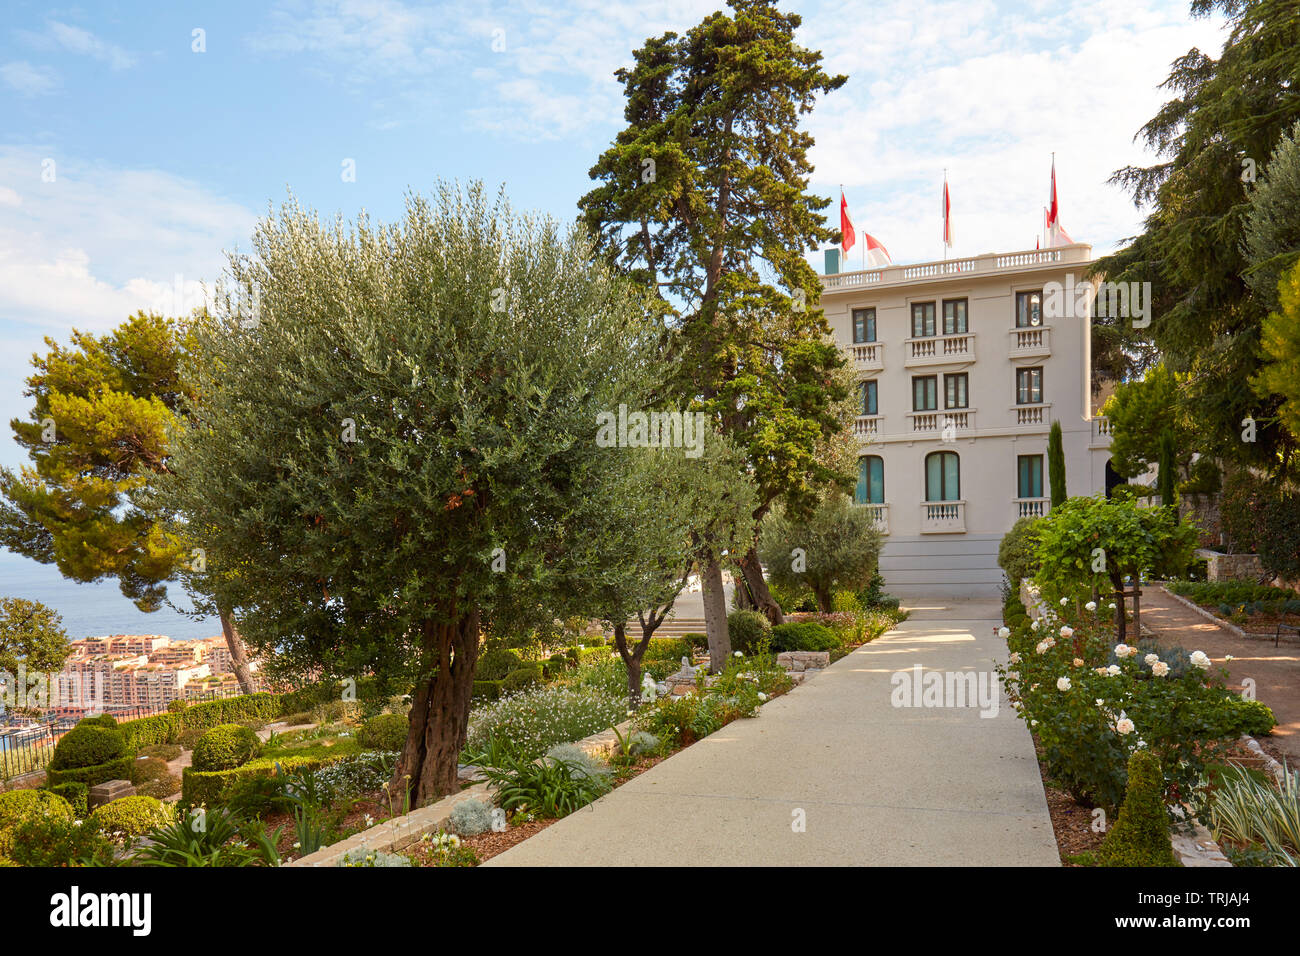 MONTE CARLO, MONACO - AUGUST 20, 2016: Villa Paloma contemporary art museum garden with olive tree and roses in a sunny summer day in Monte Carlo, Mon Stock Photo